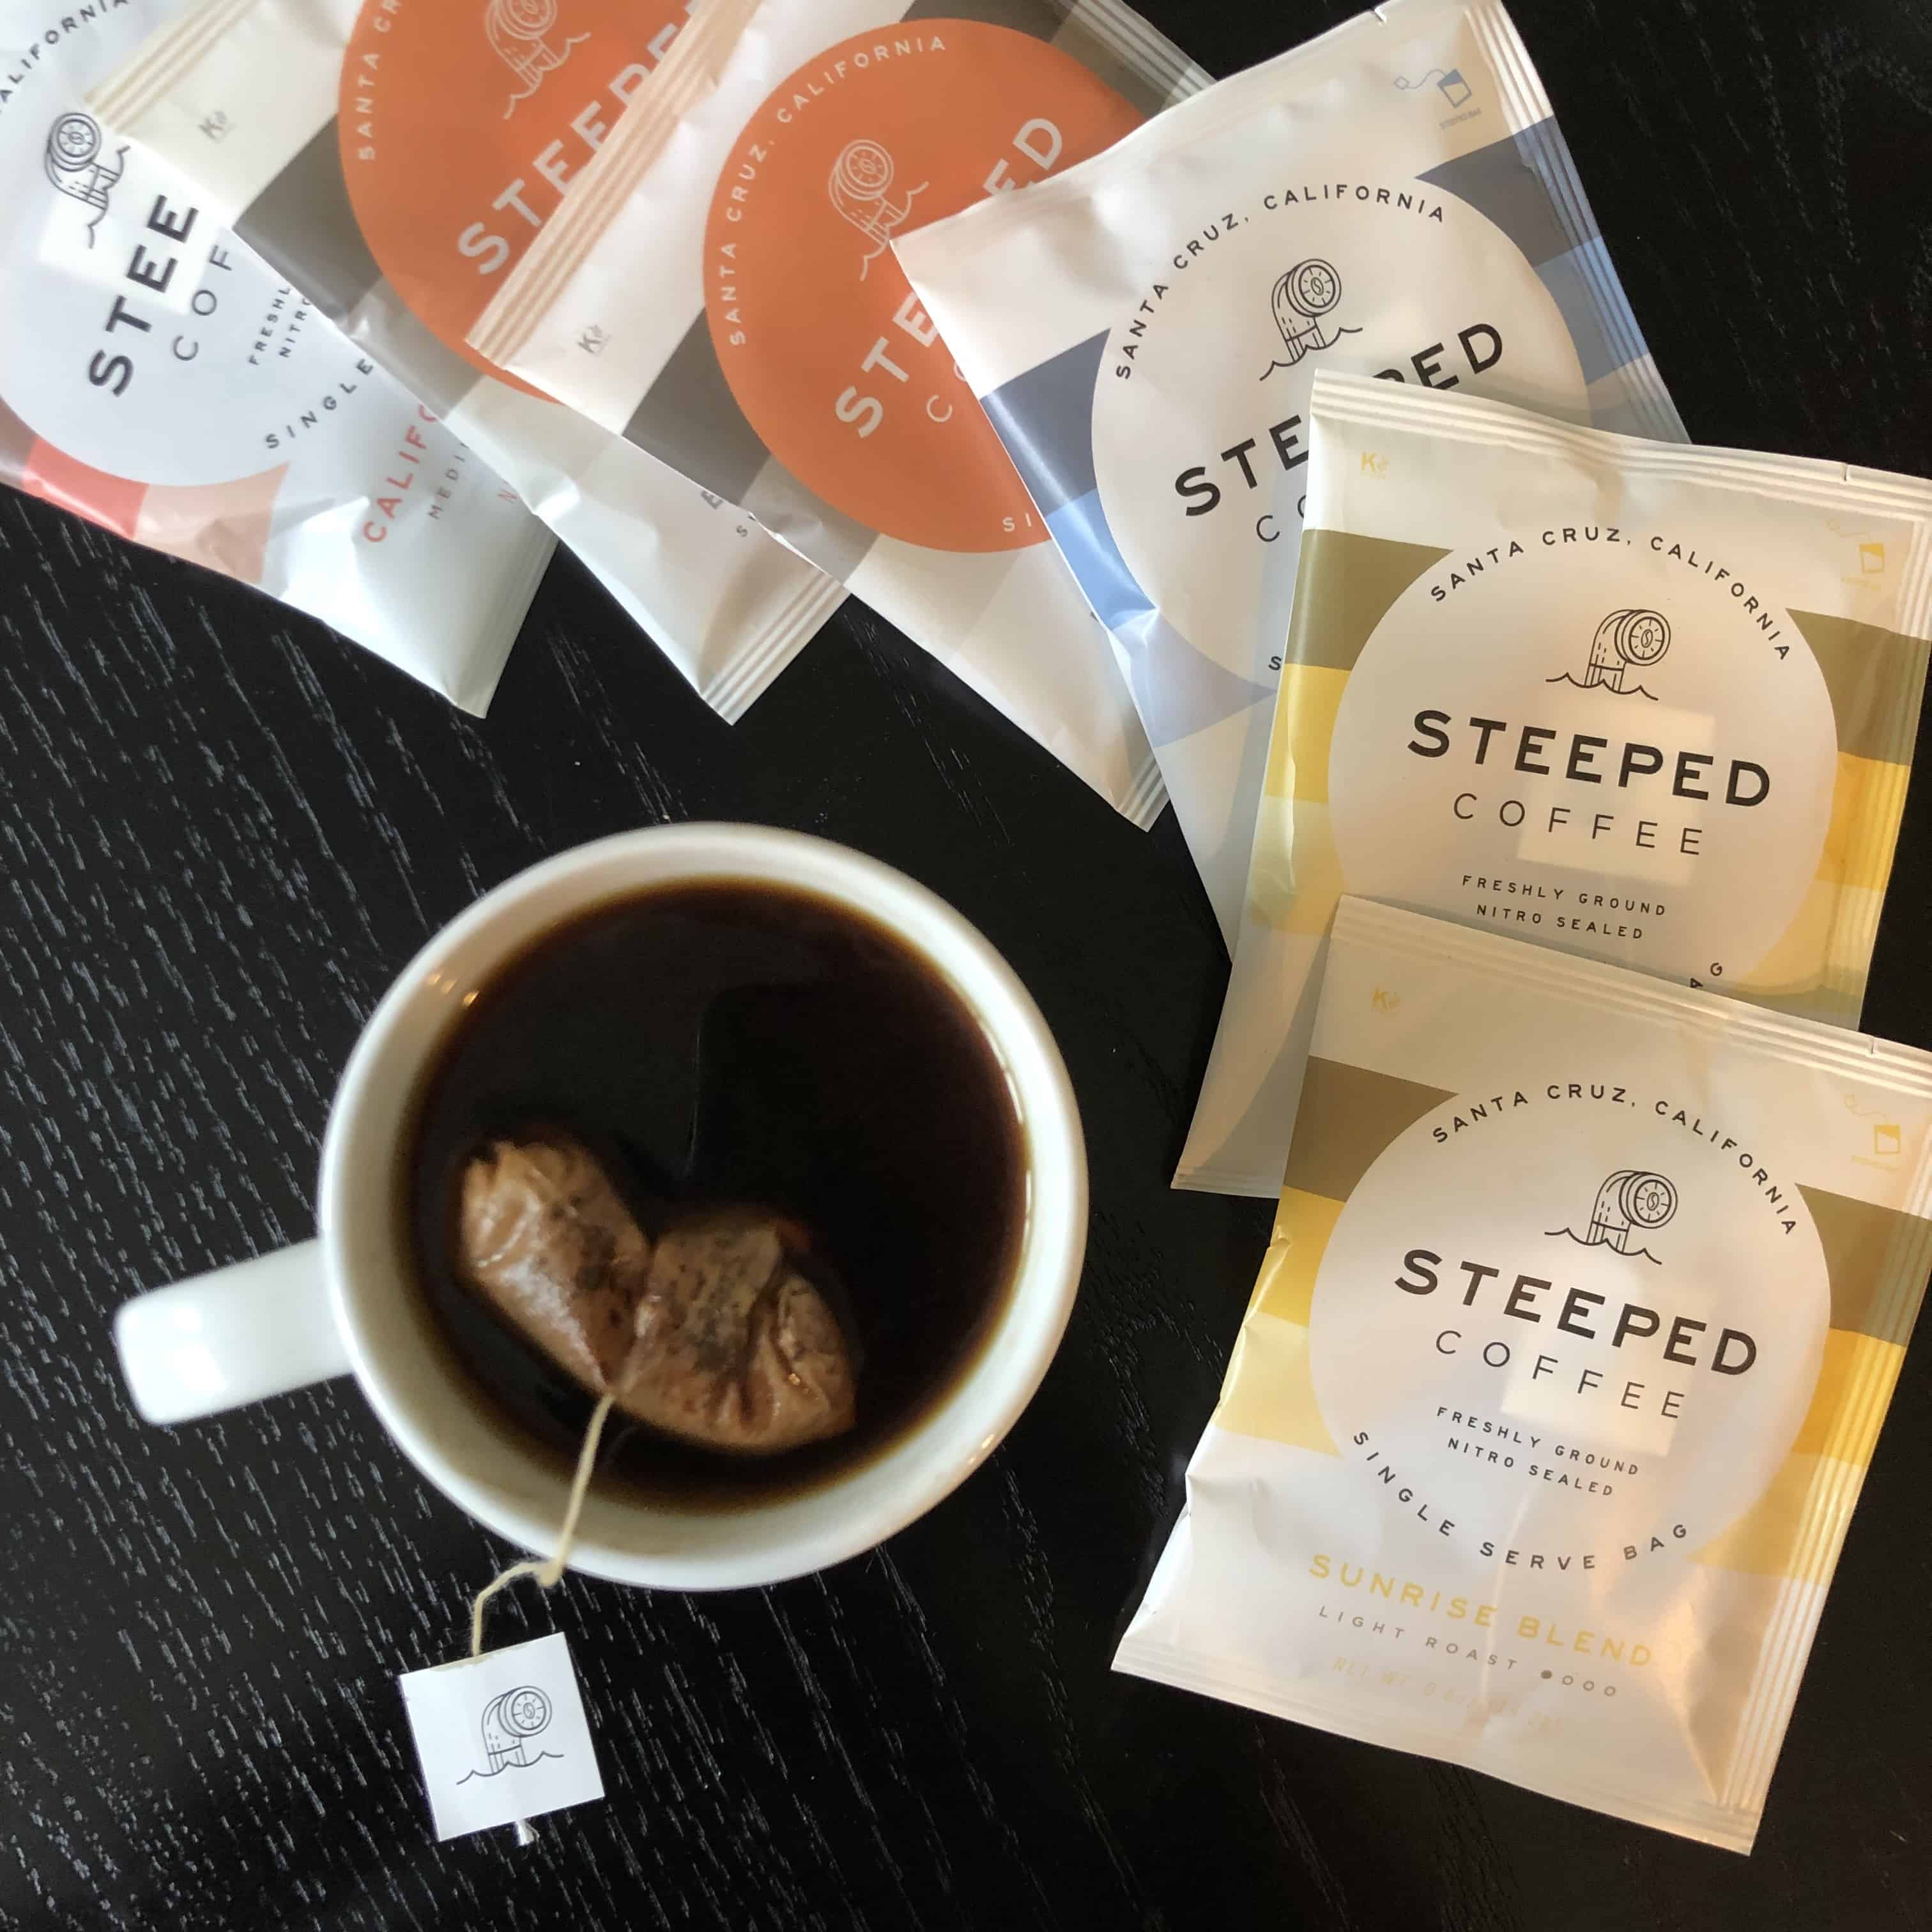 Introducing Steeped: Specialty Coffee in a Single-Serve Bag – dee Cuisine